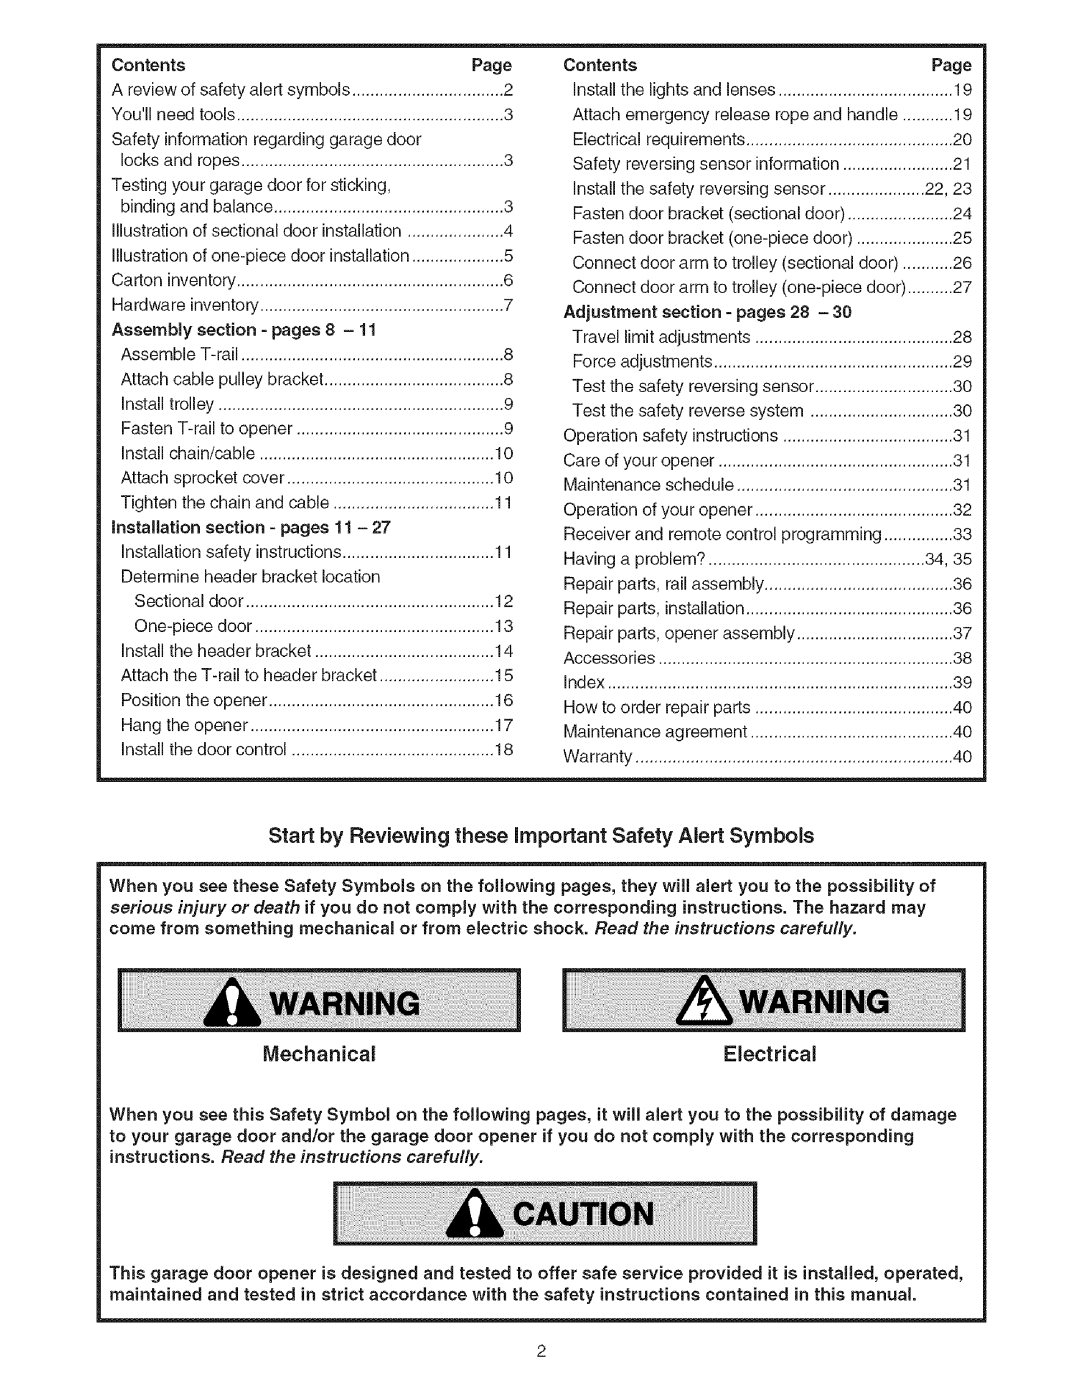 Sears 139.53535SRT1 Start by Reviewing these Important Safety Alert Symbols, MechanicalElectrical, installationsafety 